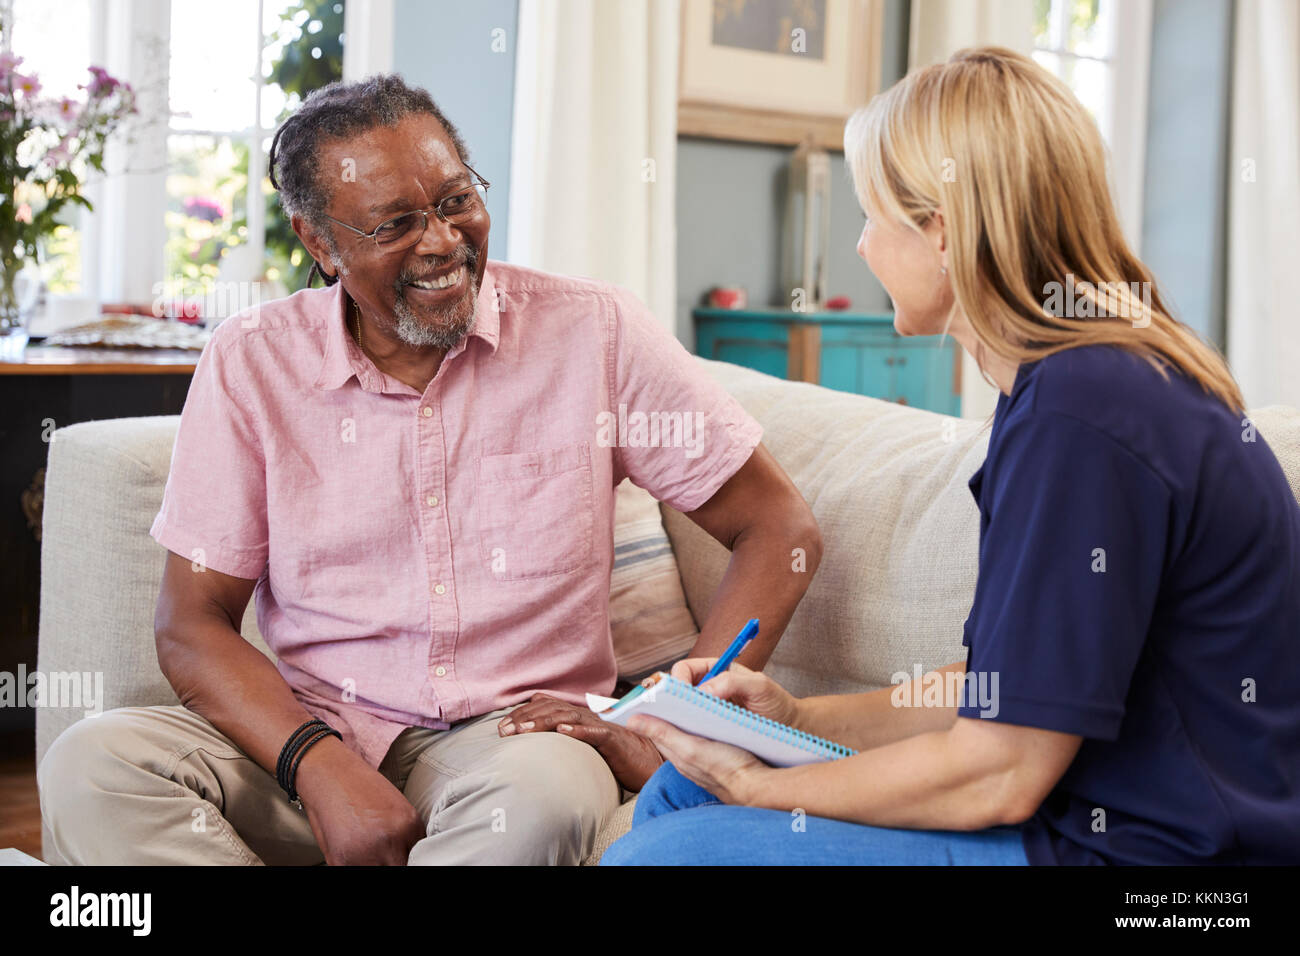 Female Support Worker Visits Senior Man At Home Stock Photo